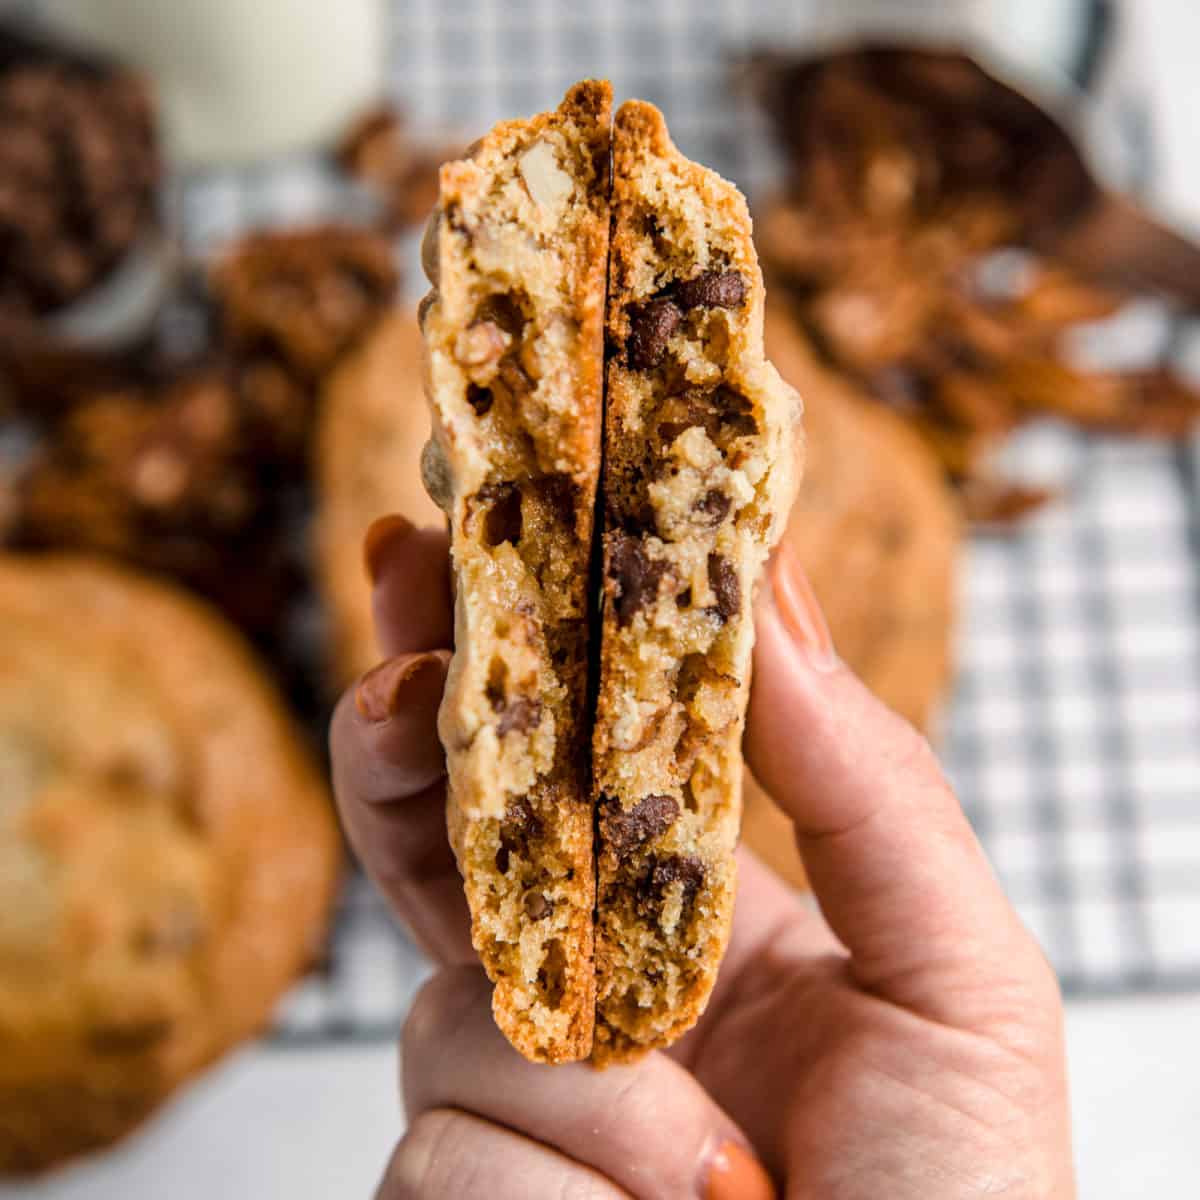 The inside of soft chocolate chip cookies with pecans.